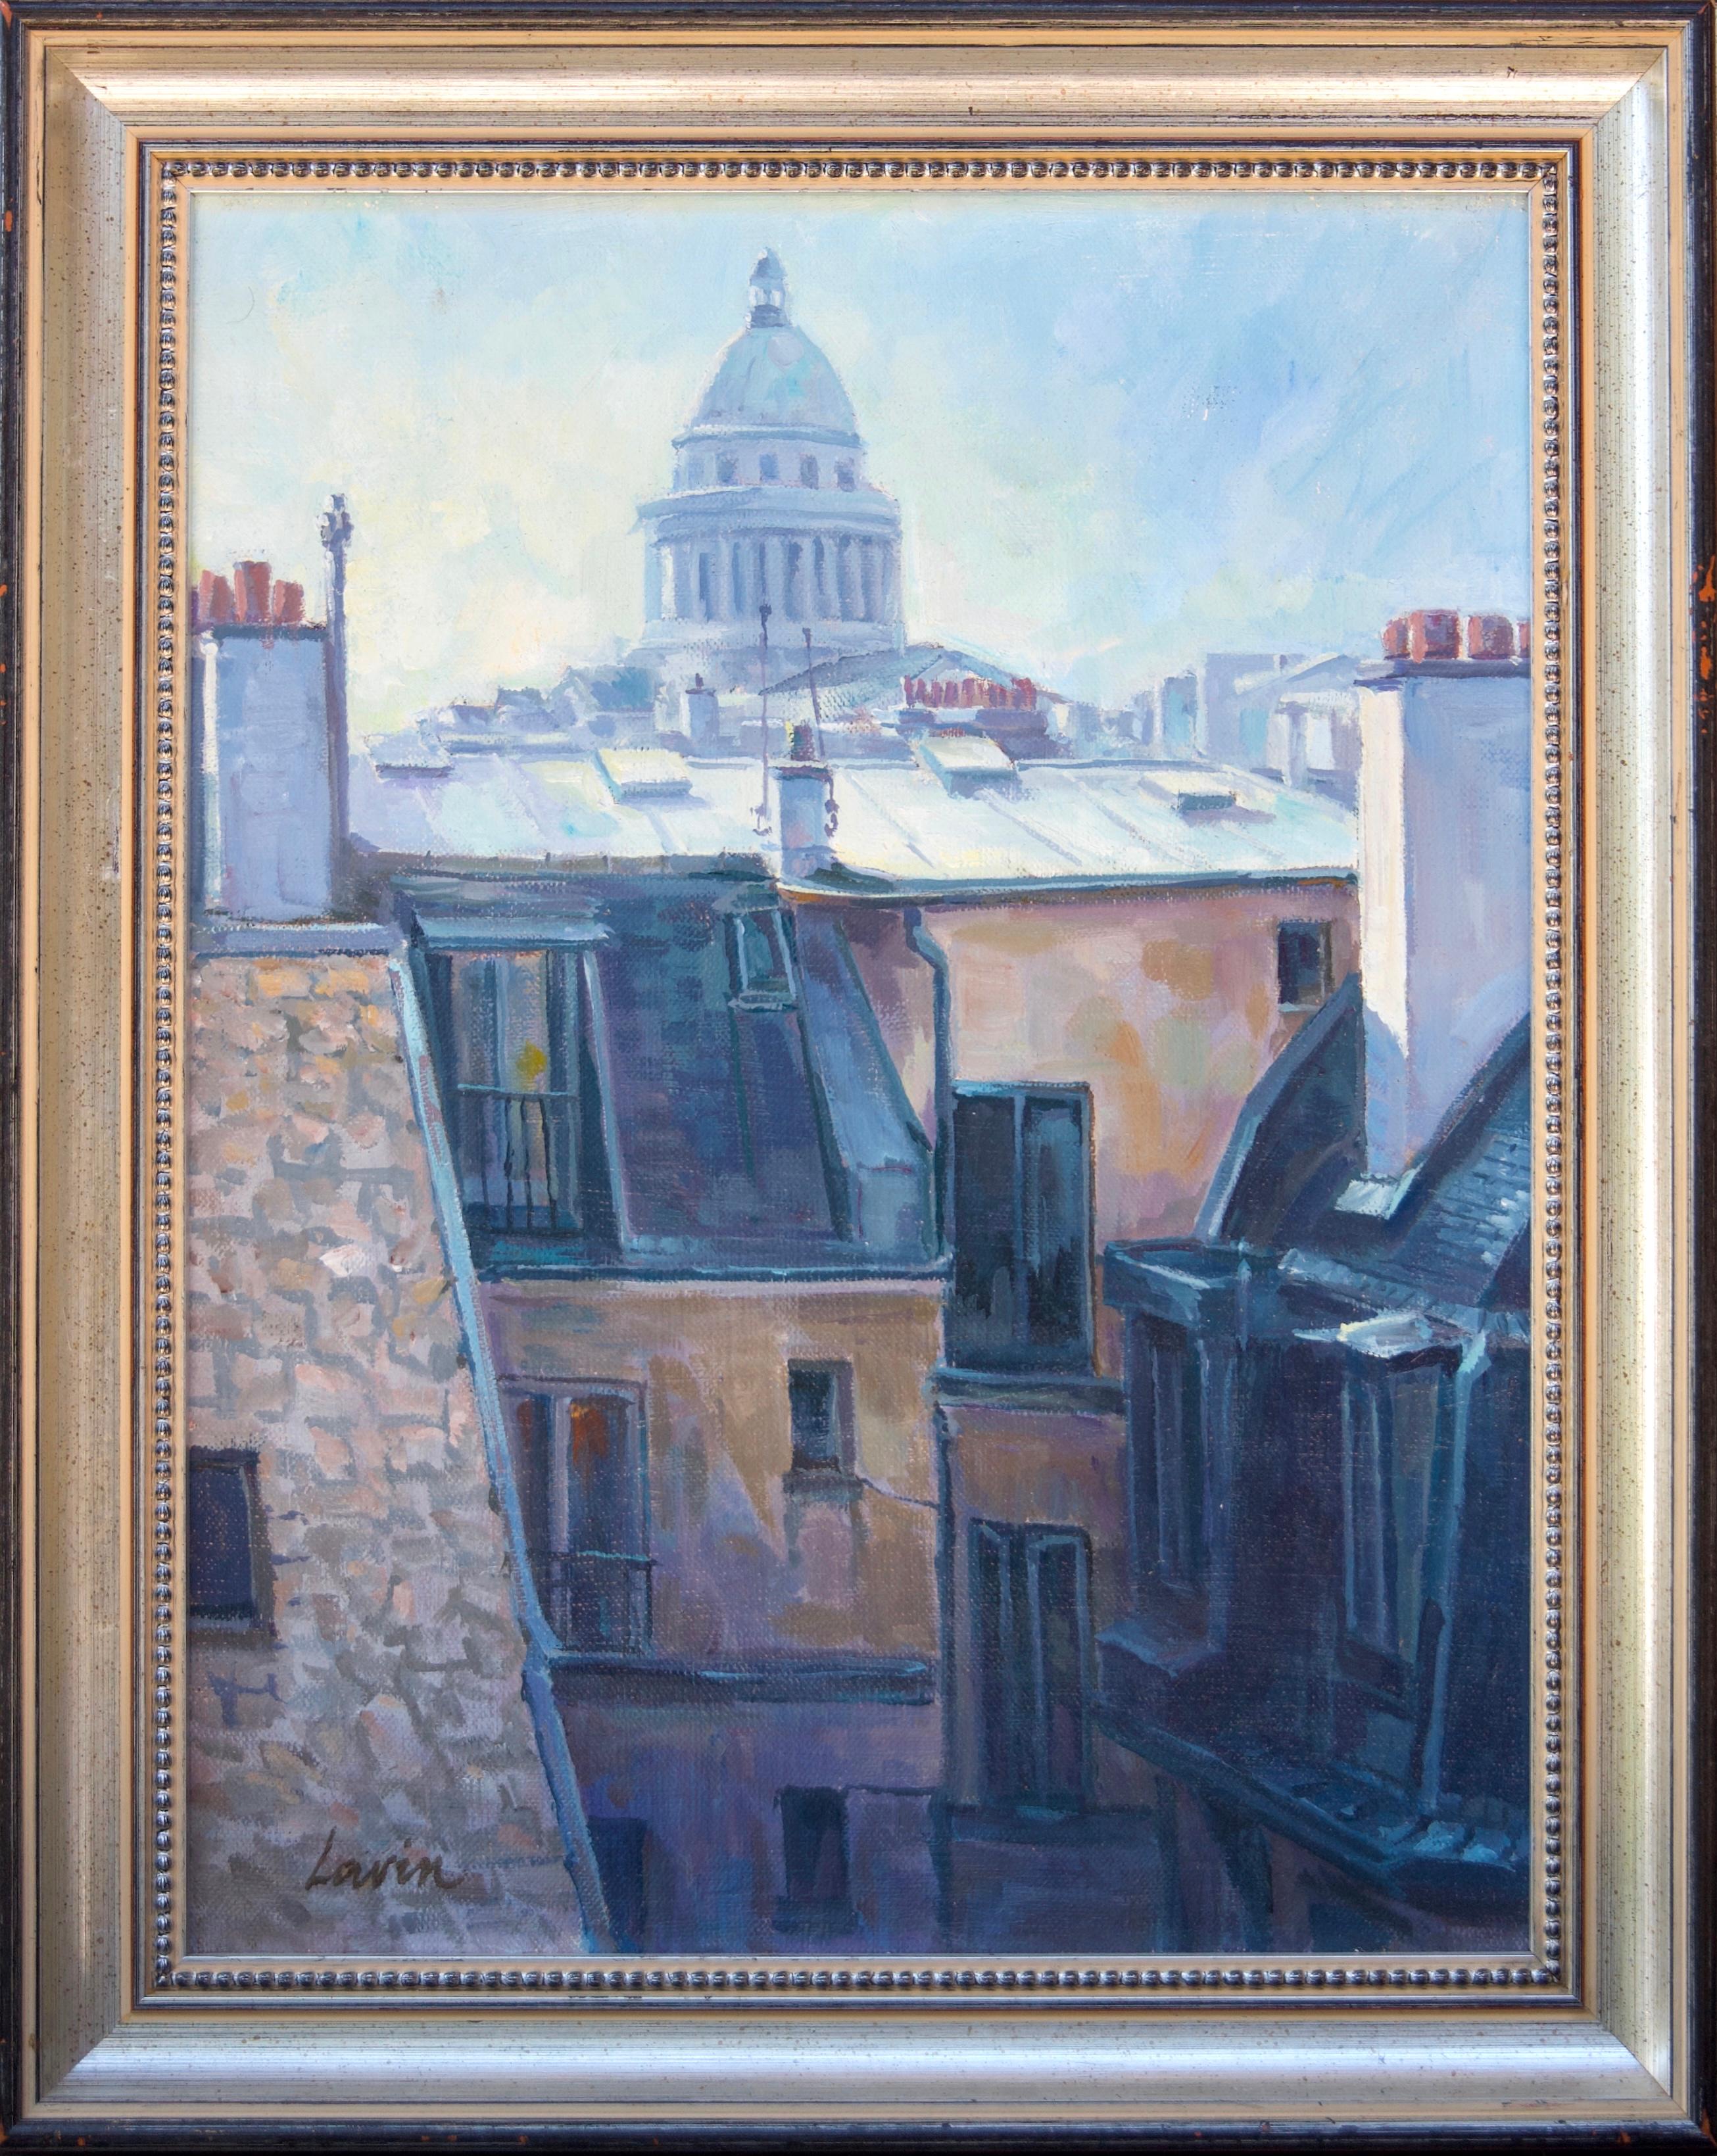 Dawn at the Capital - Painting by Robert Lavin